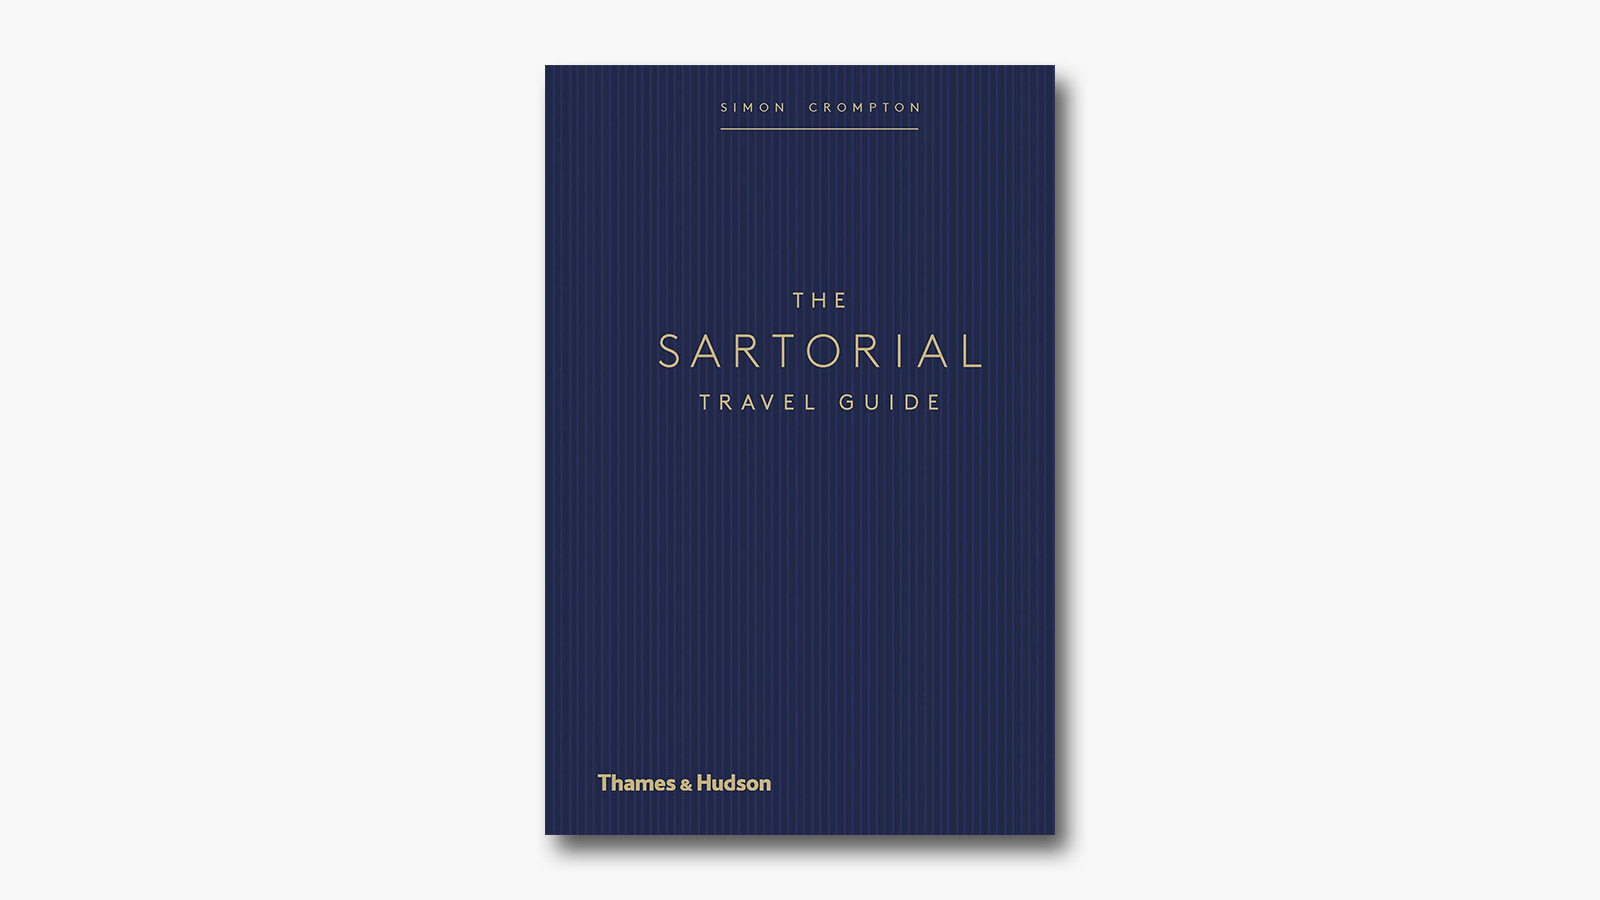 ‘The Sartorial Travel Guide’ by Simon Crompton